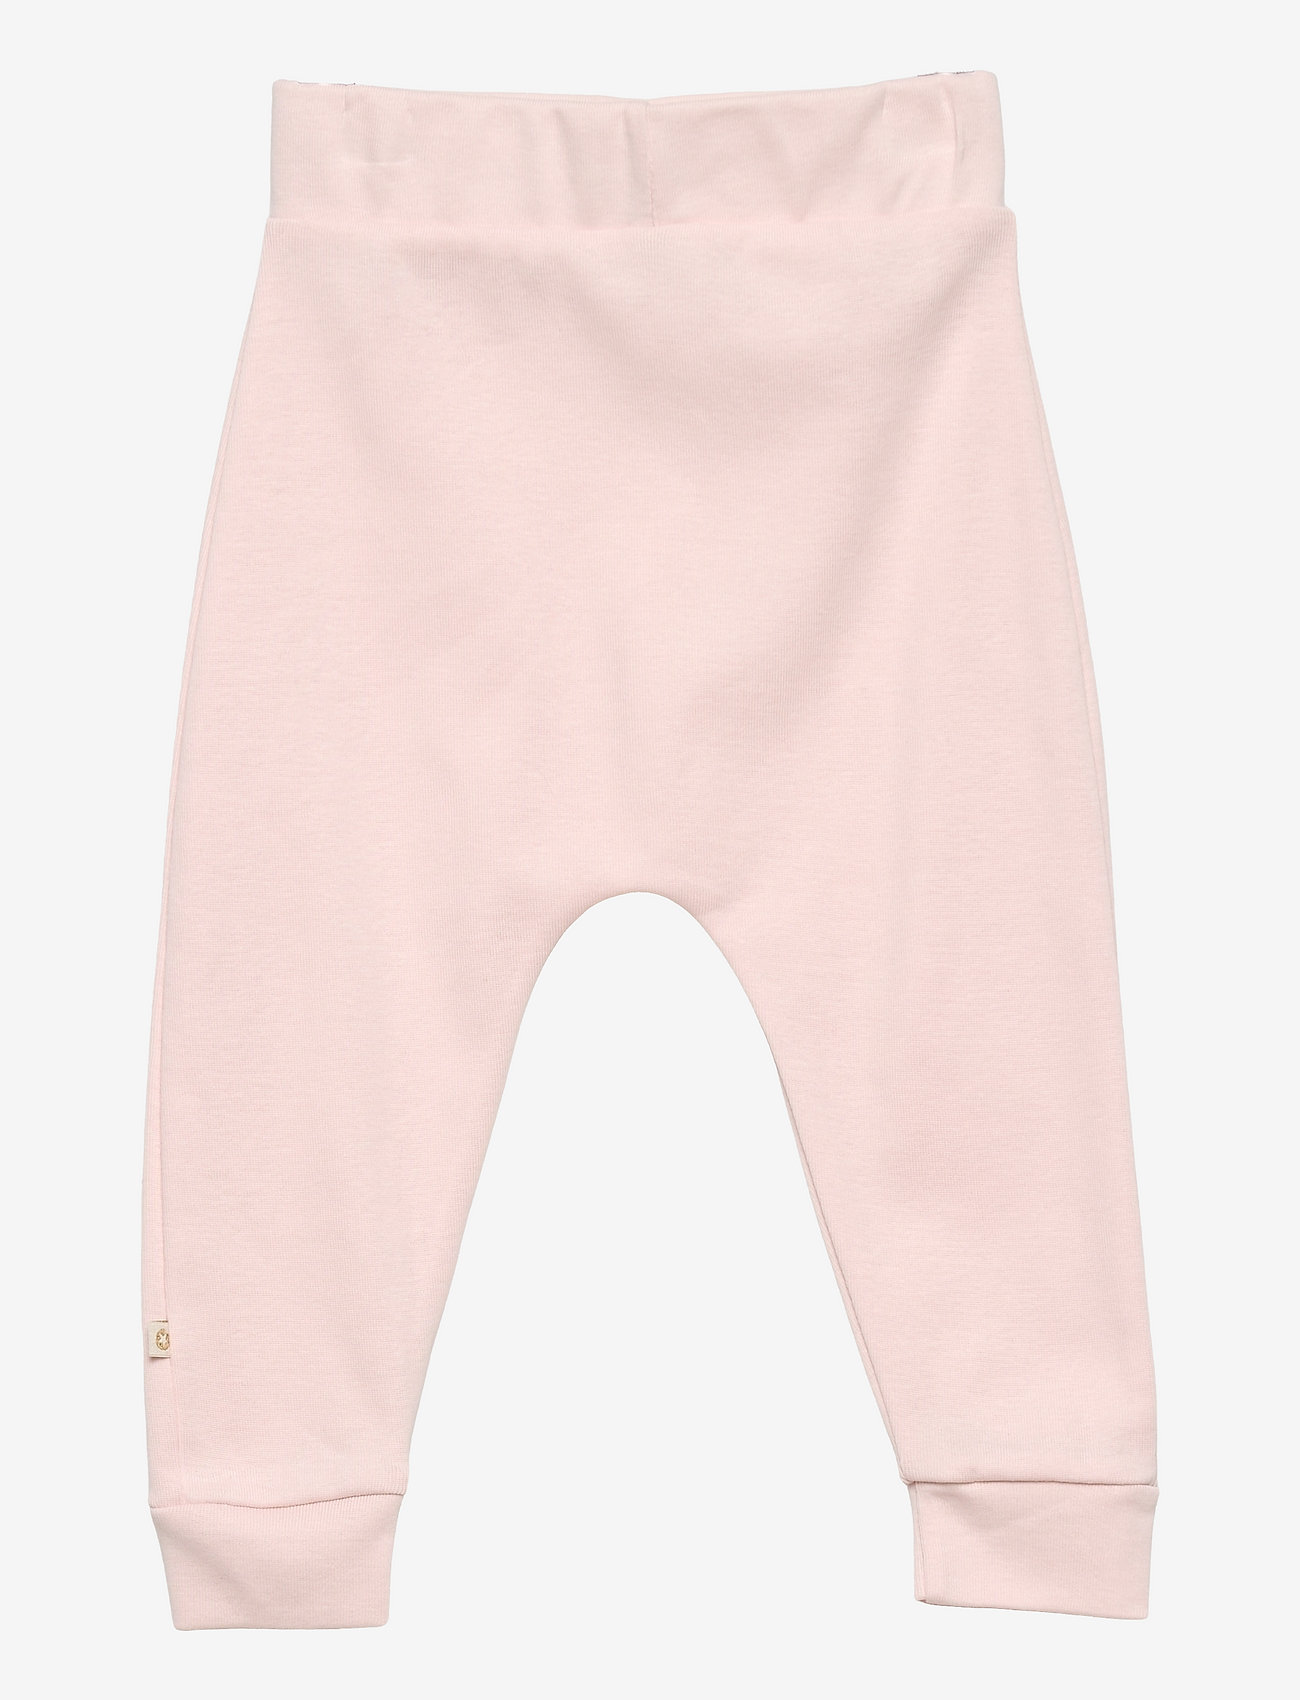 Smallstuff - Pants - lowest prices - soft rose - 1